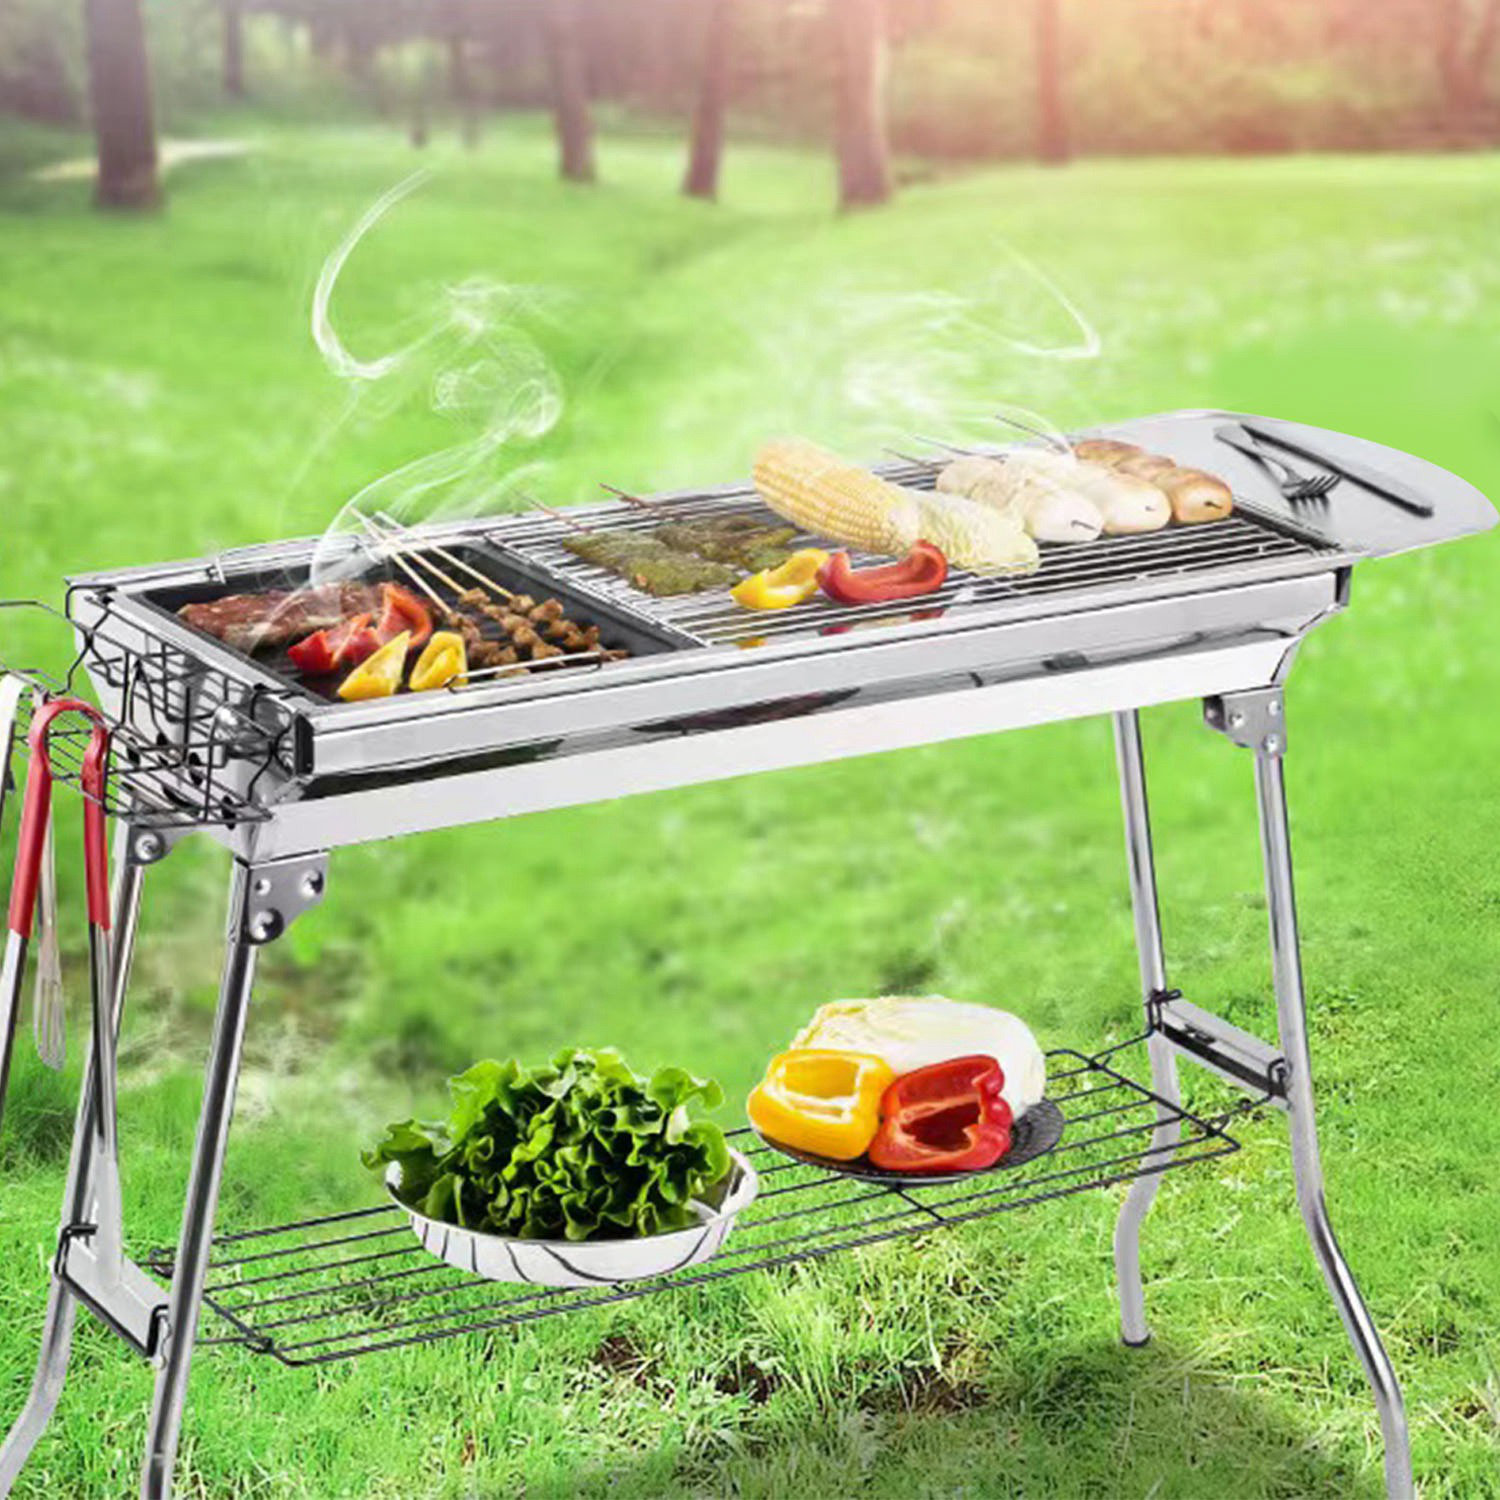 iMounTEK Outdoor Portable Barbecue Grill Foldable Charcoal BBQ Grill Tool,  Ease of Assembly